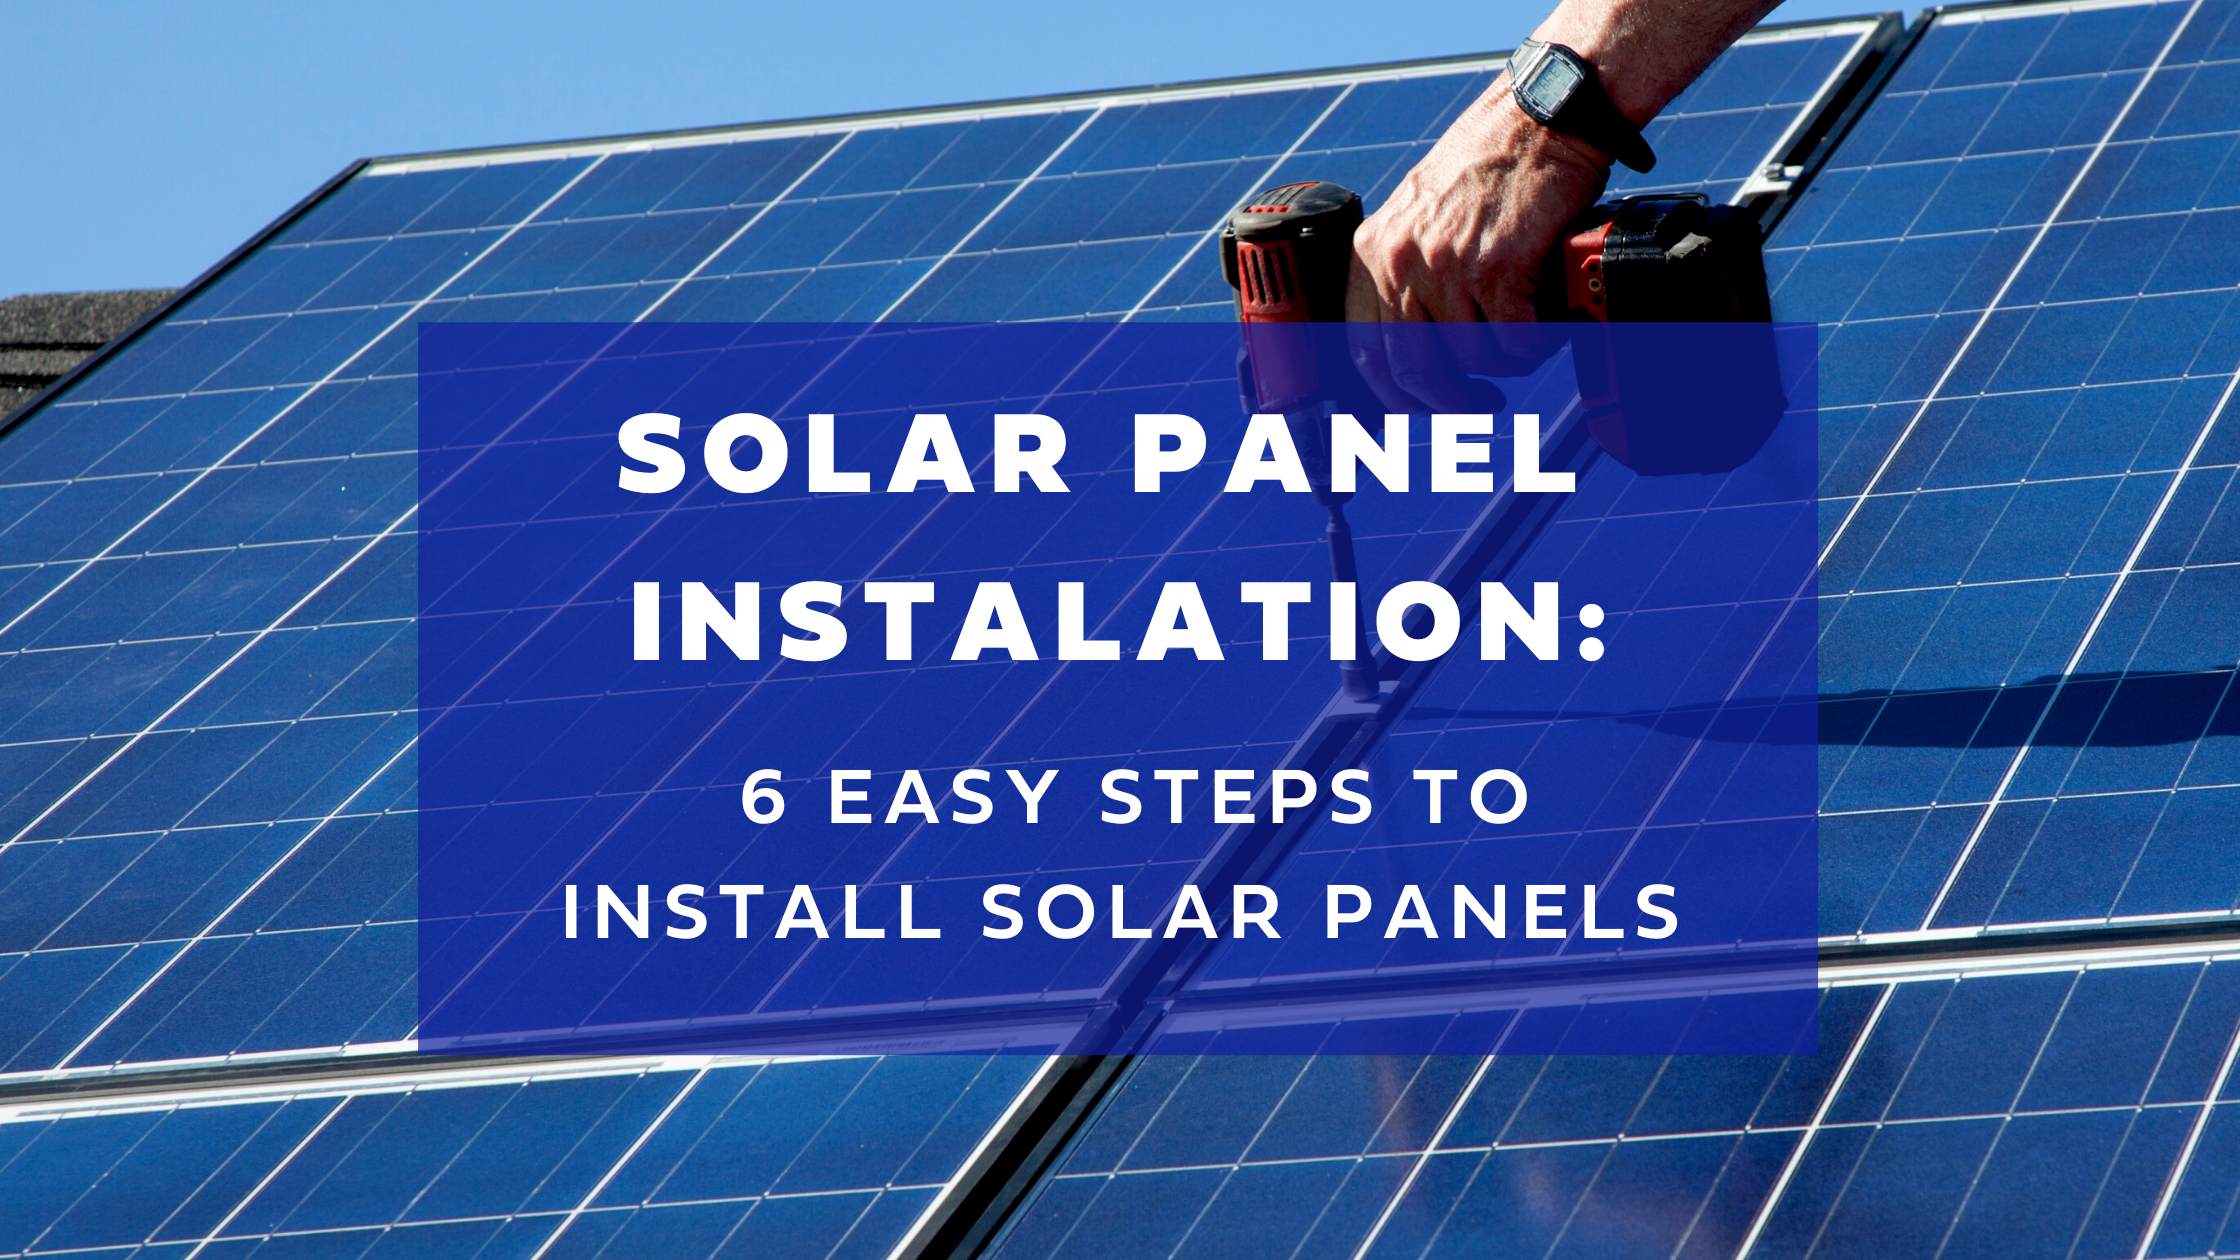 How Are Solar Panels Installed: 6 Easy Steps To Install Solar Panels